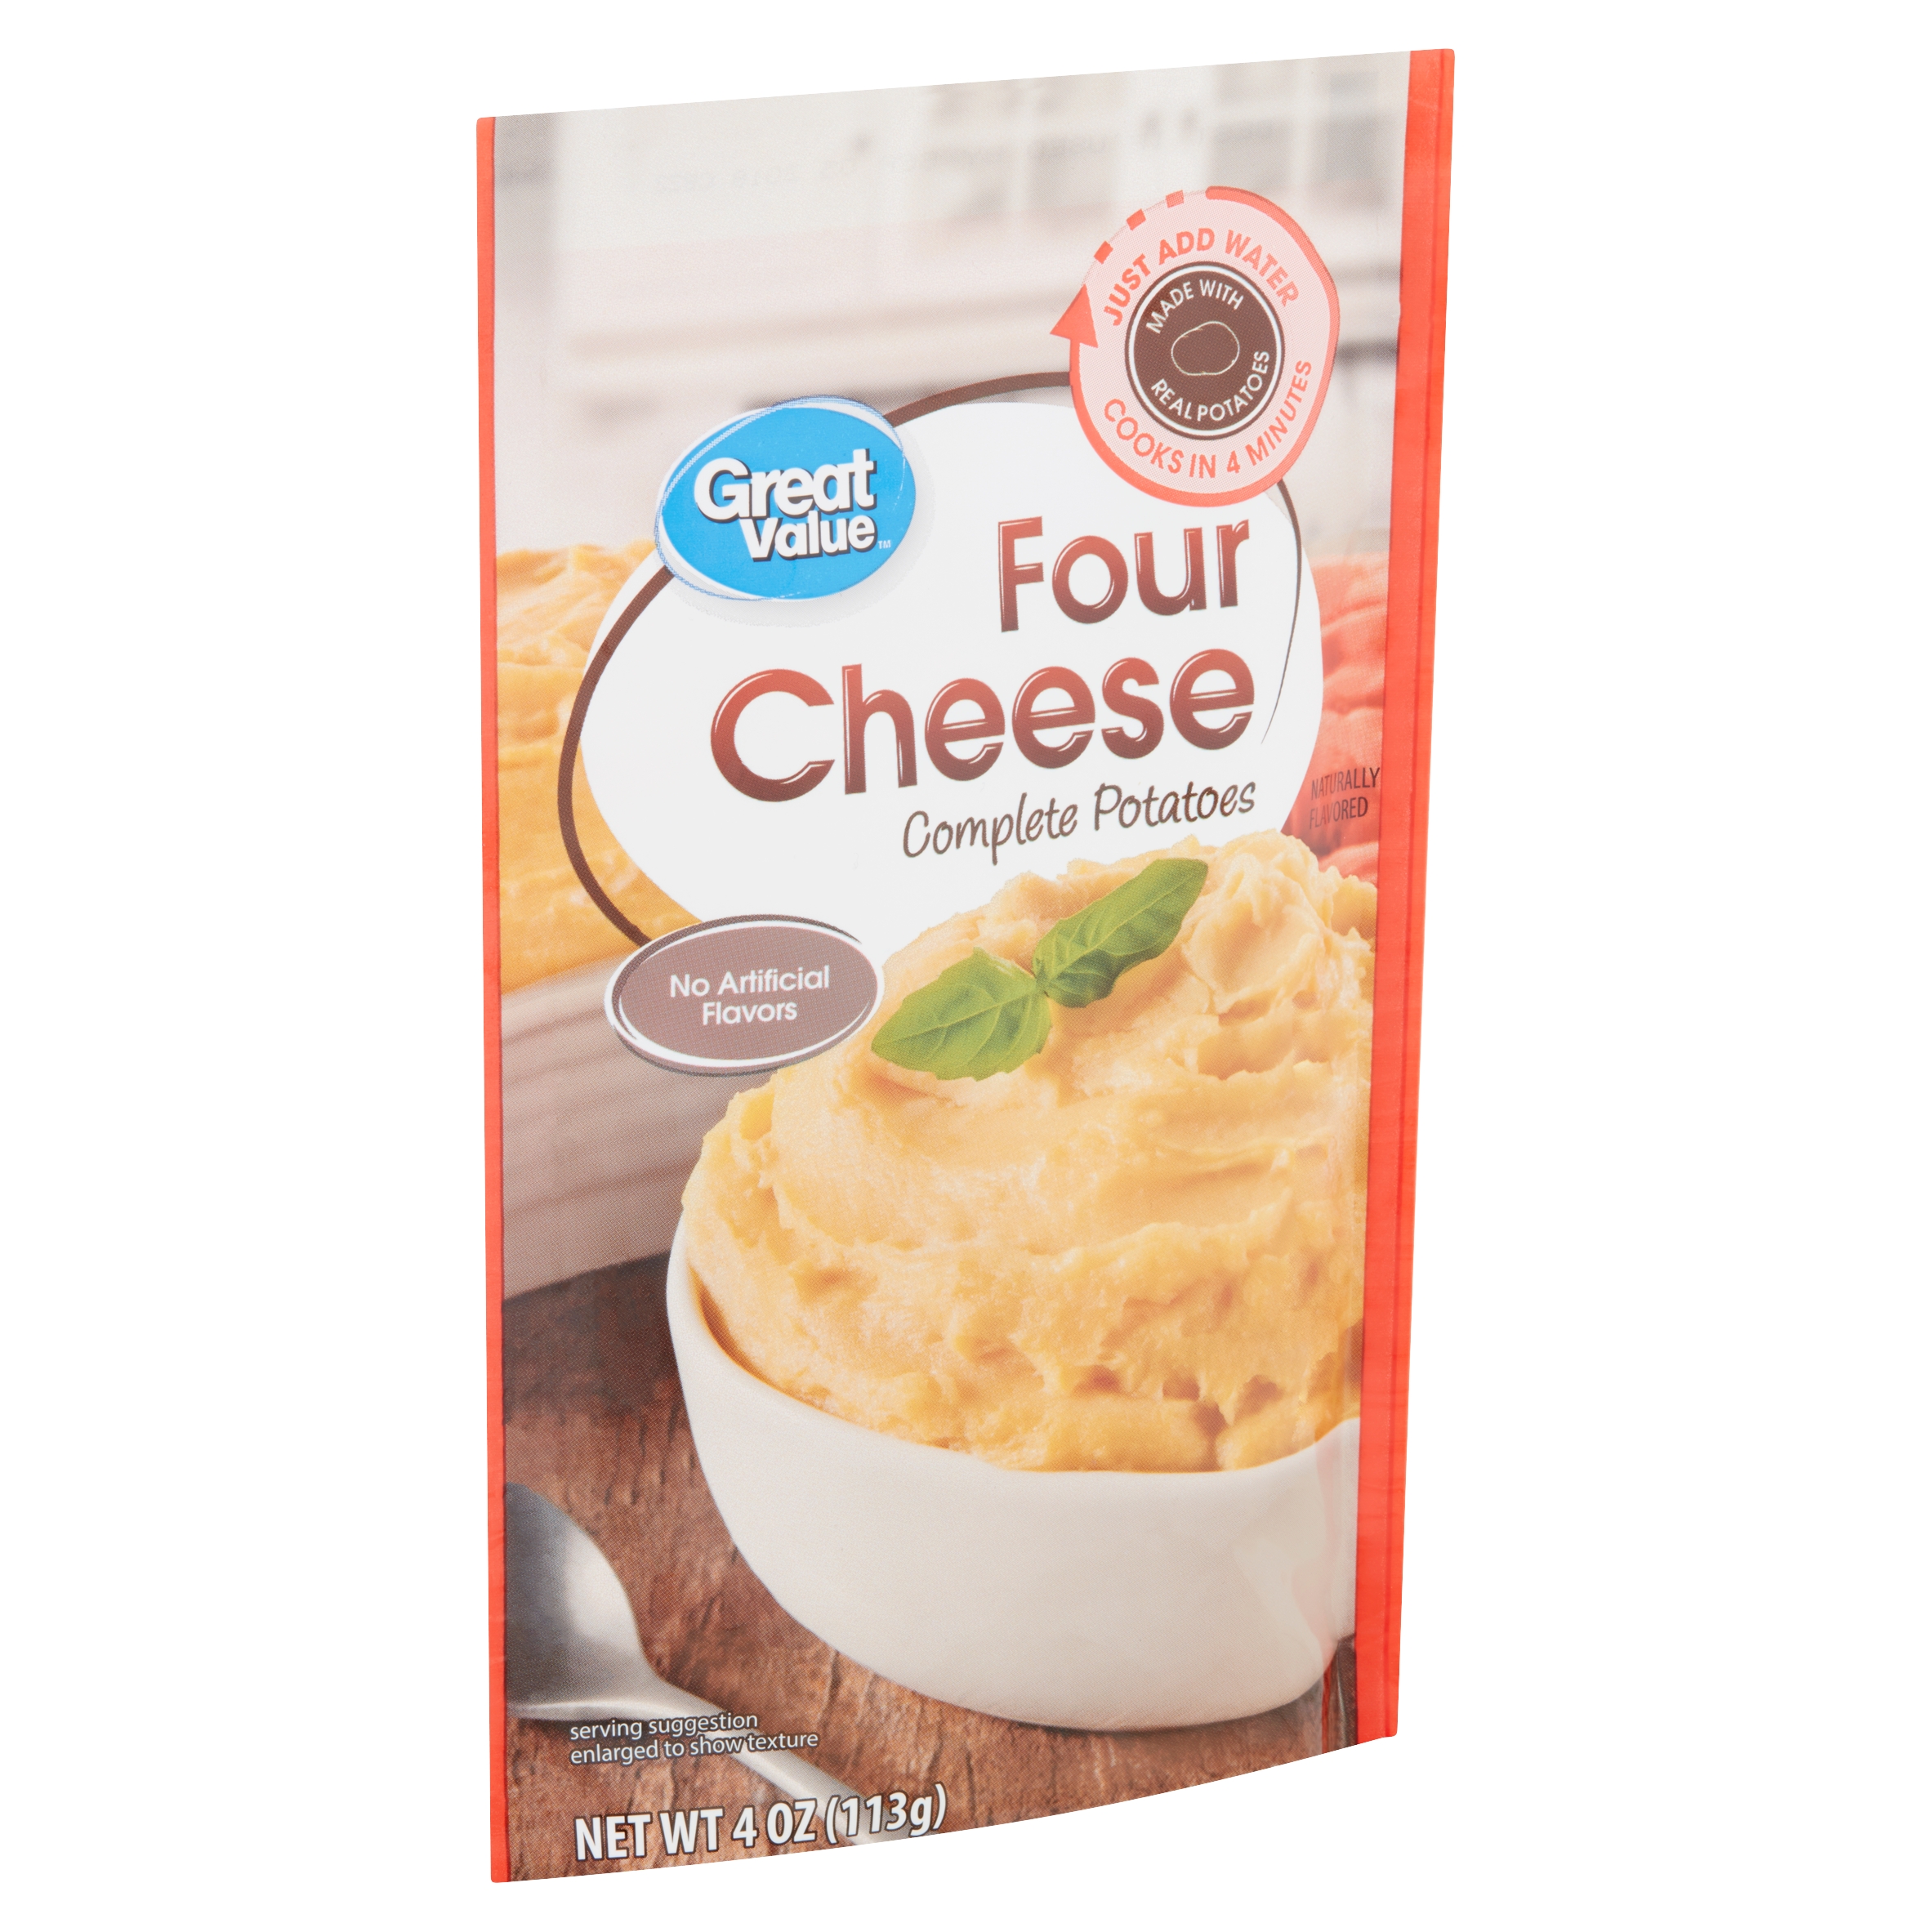 Great Value Four Cheese Complete Potatoes 4 Oz Image